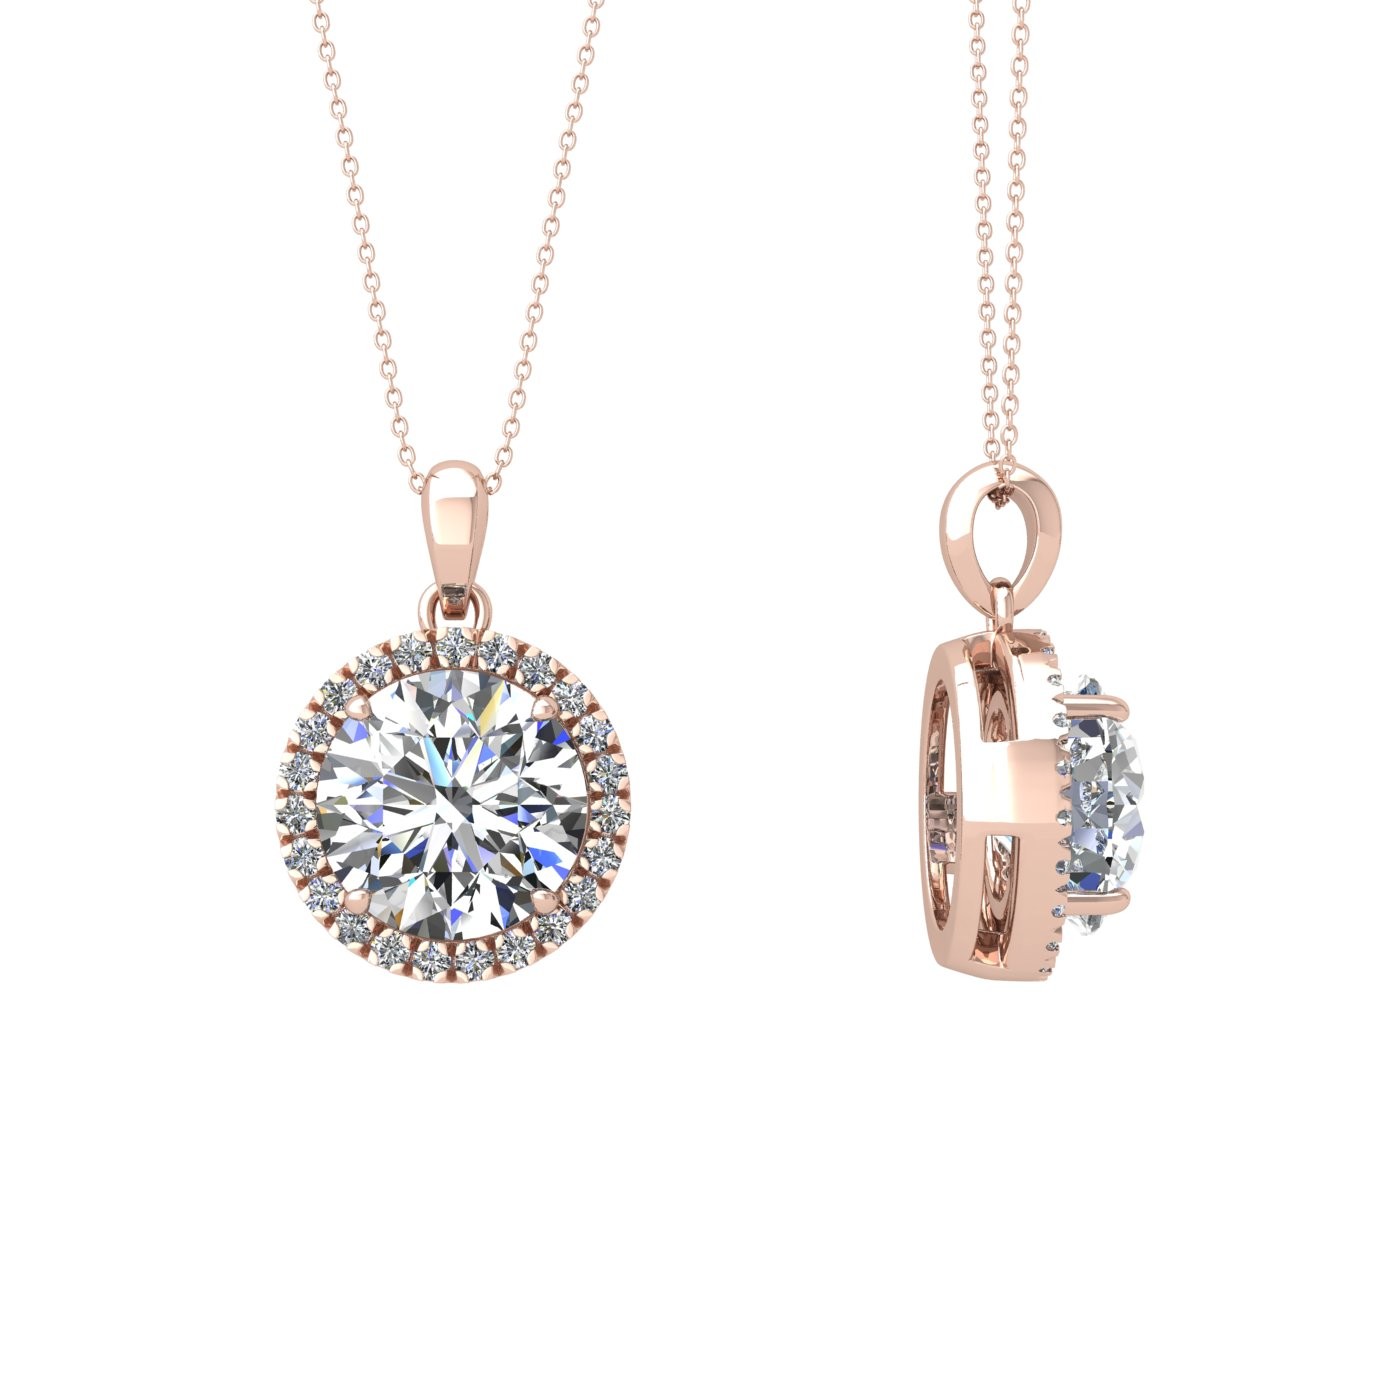 18k rose gold  2,5 ct 4 prong round shape diamond pendant with diamond pavÉ set halo including chain seperate from the pendant Photos & images